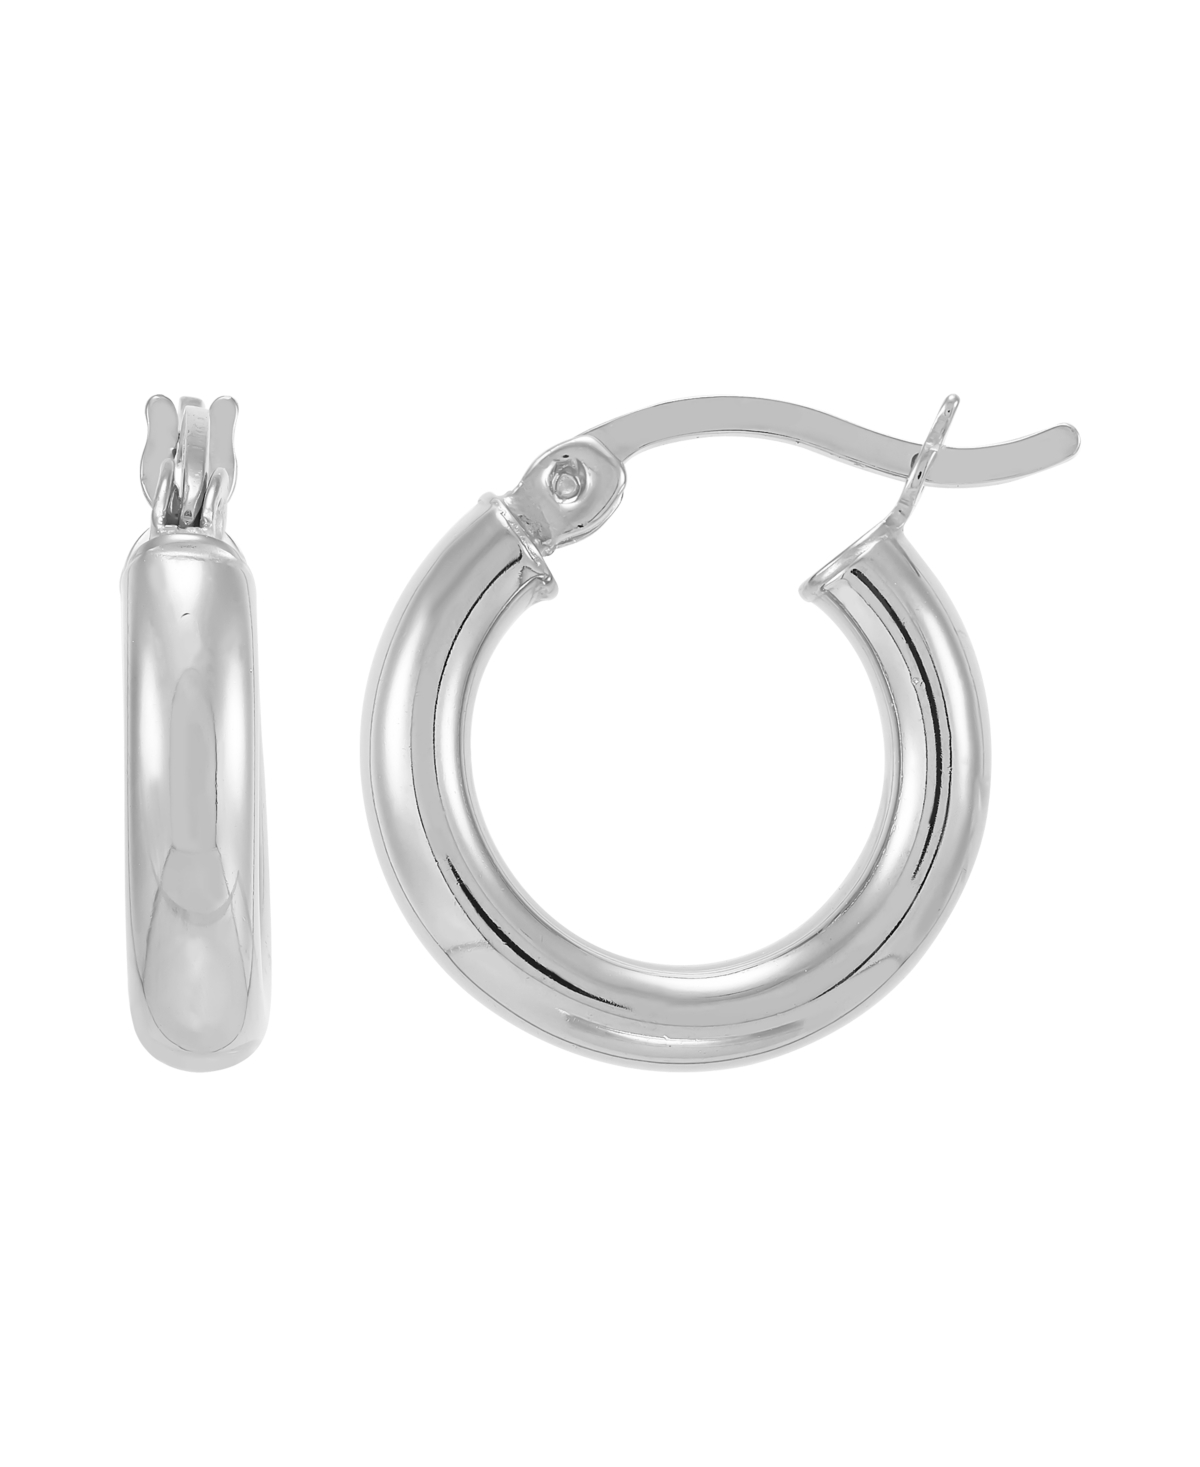 Polished Tube Hoop Earrings, 15mm, Created for Macy's - Sterling Silver